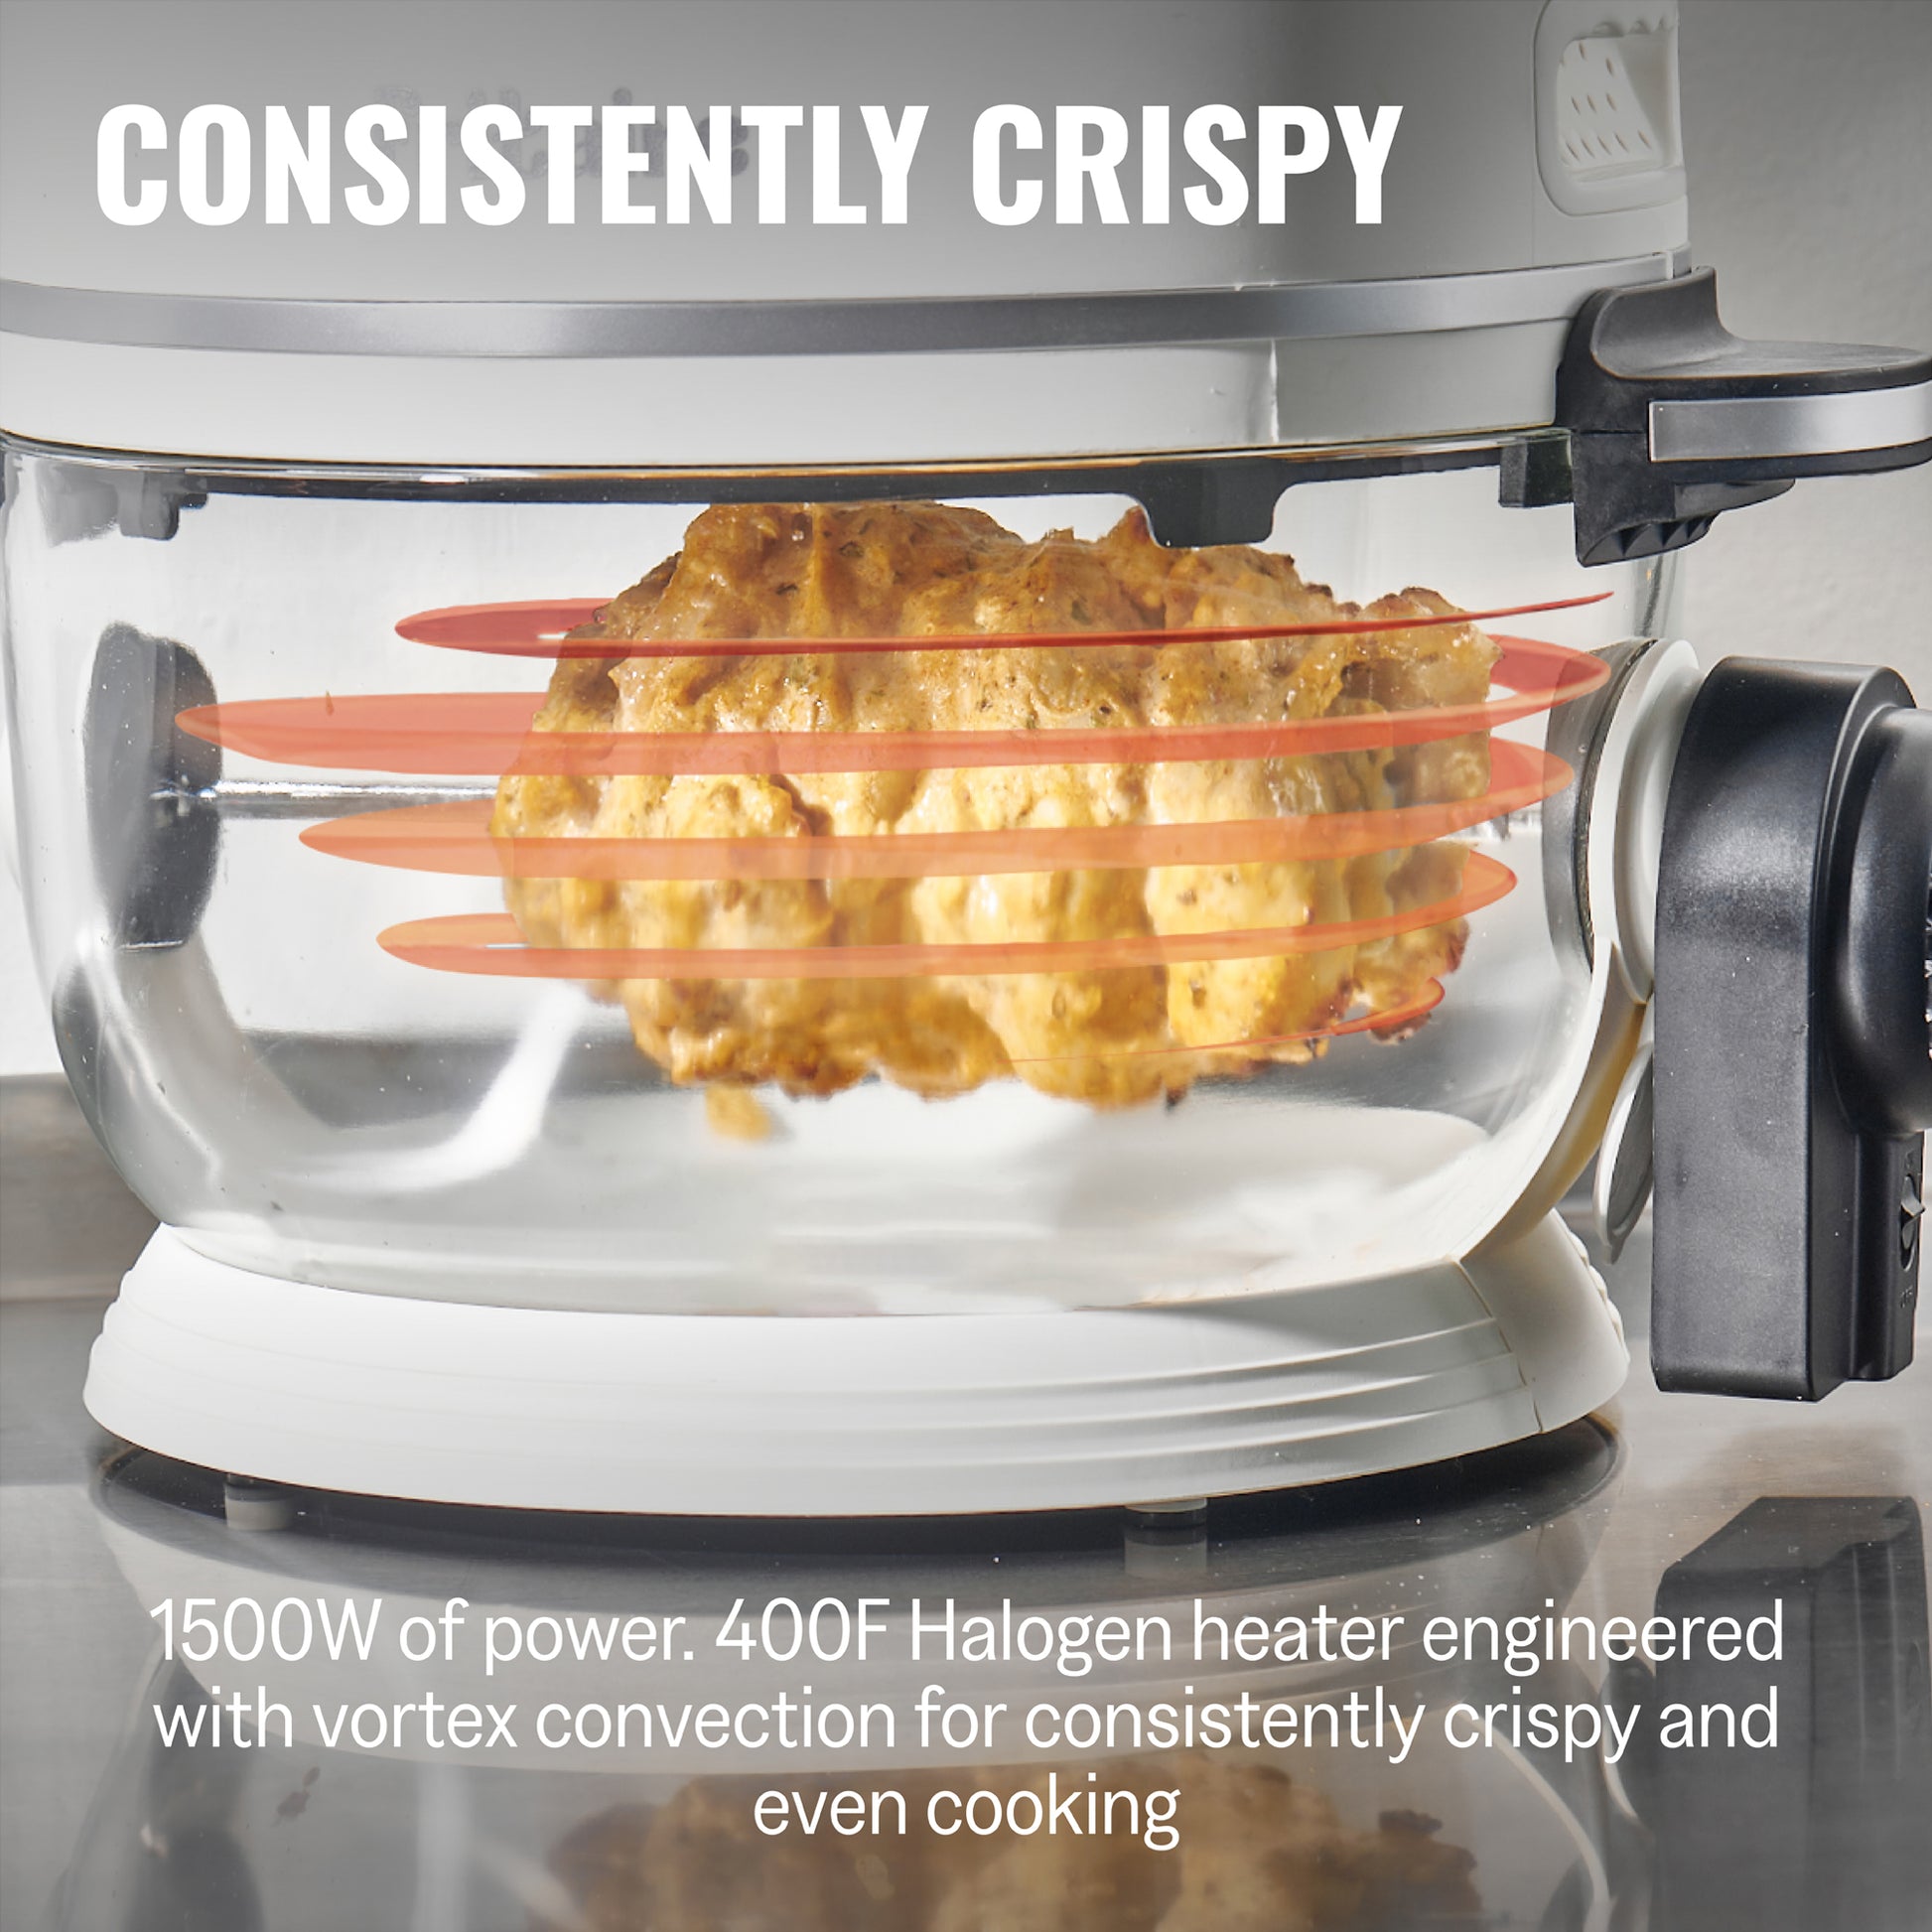 Healthy Air Fryer with Glass Bowl